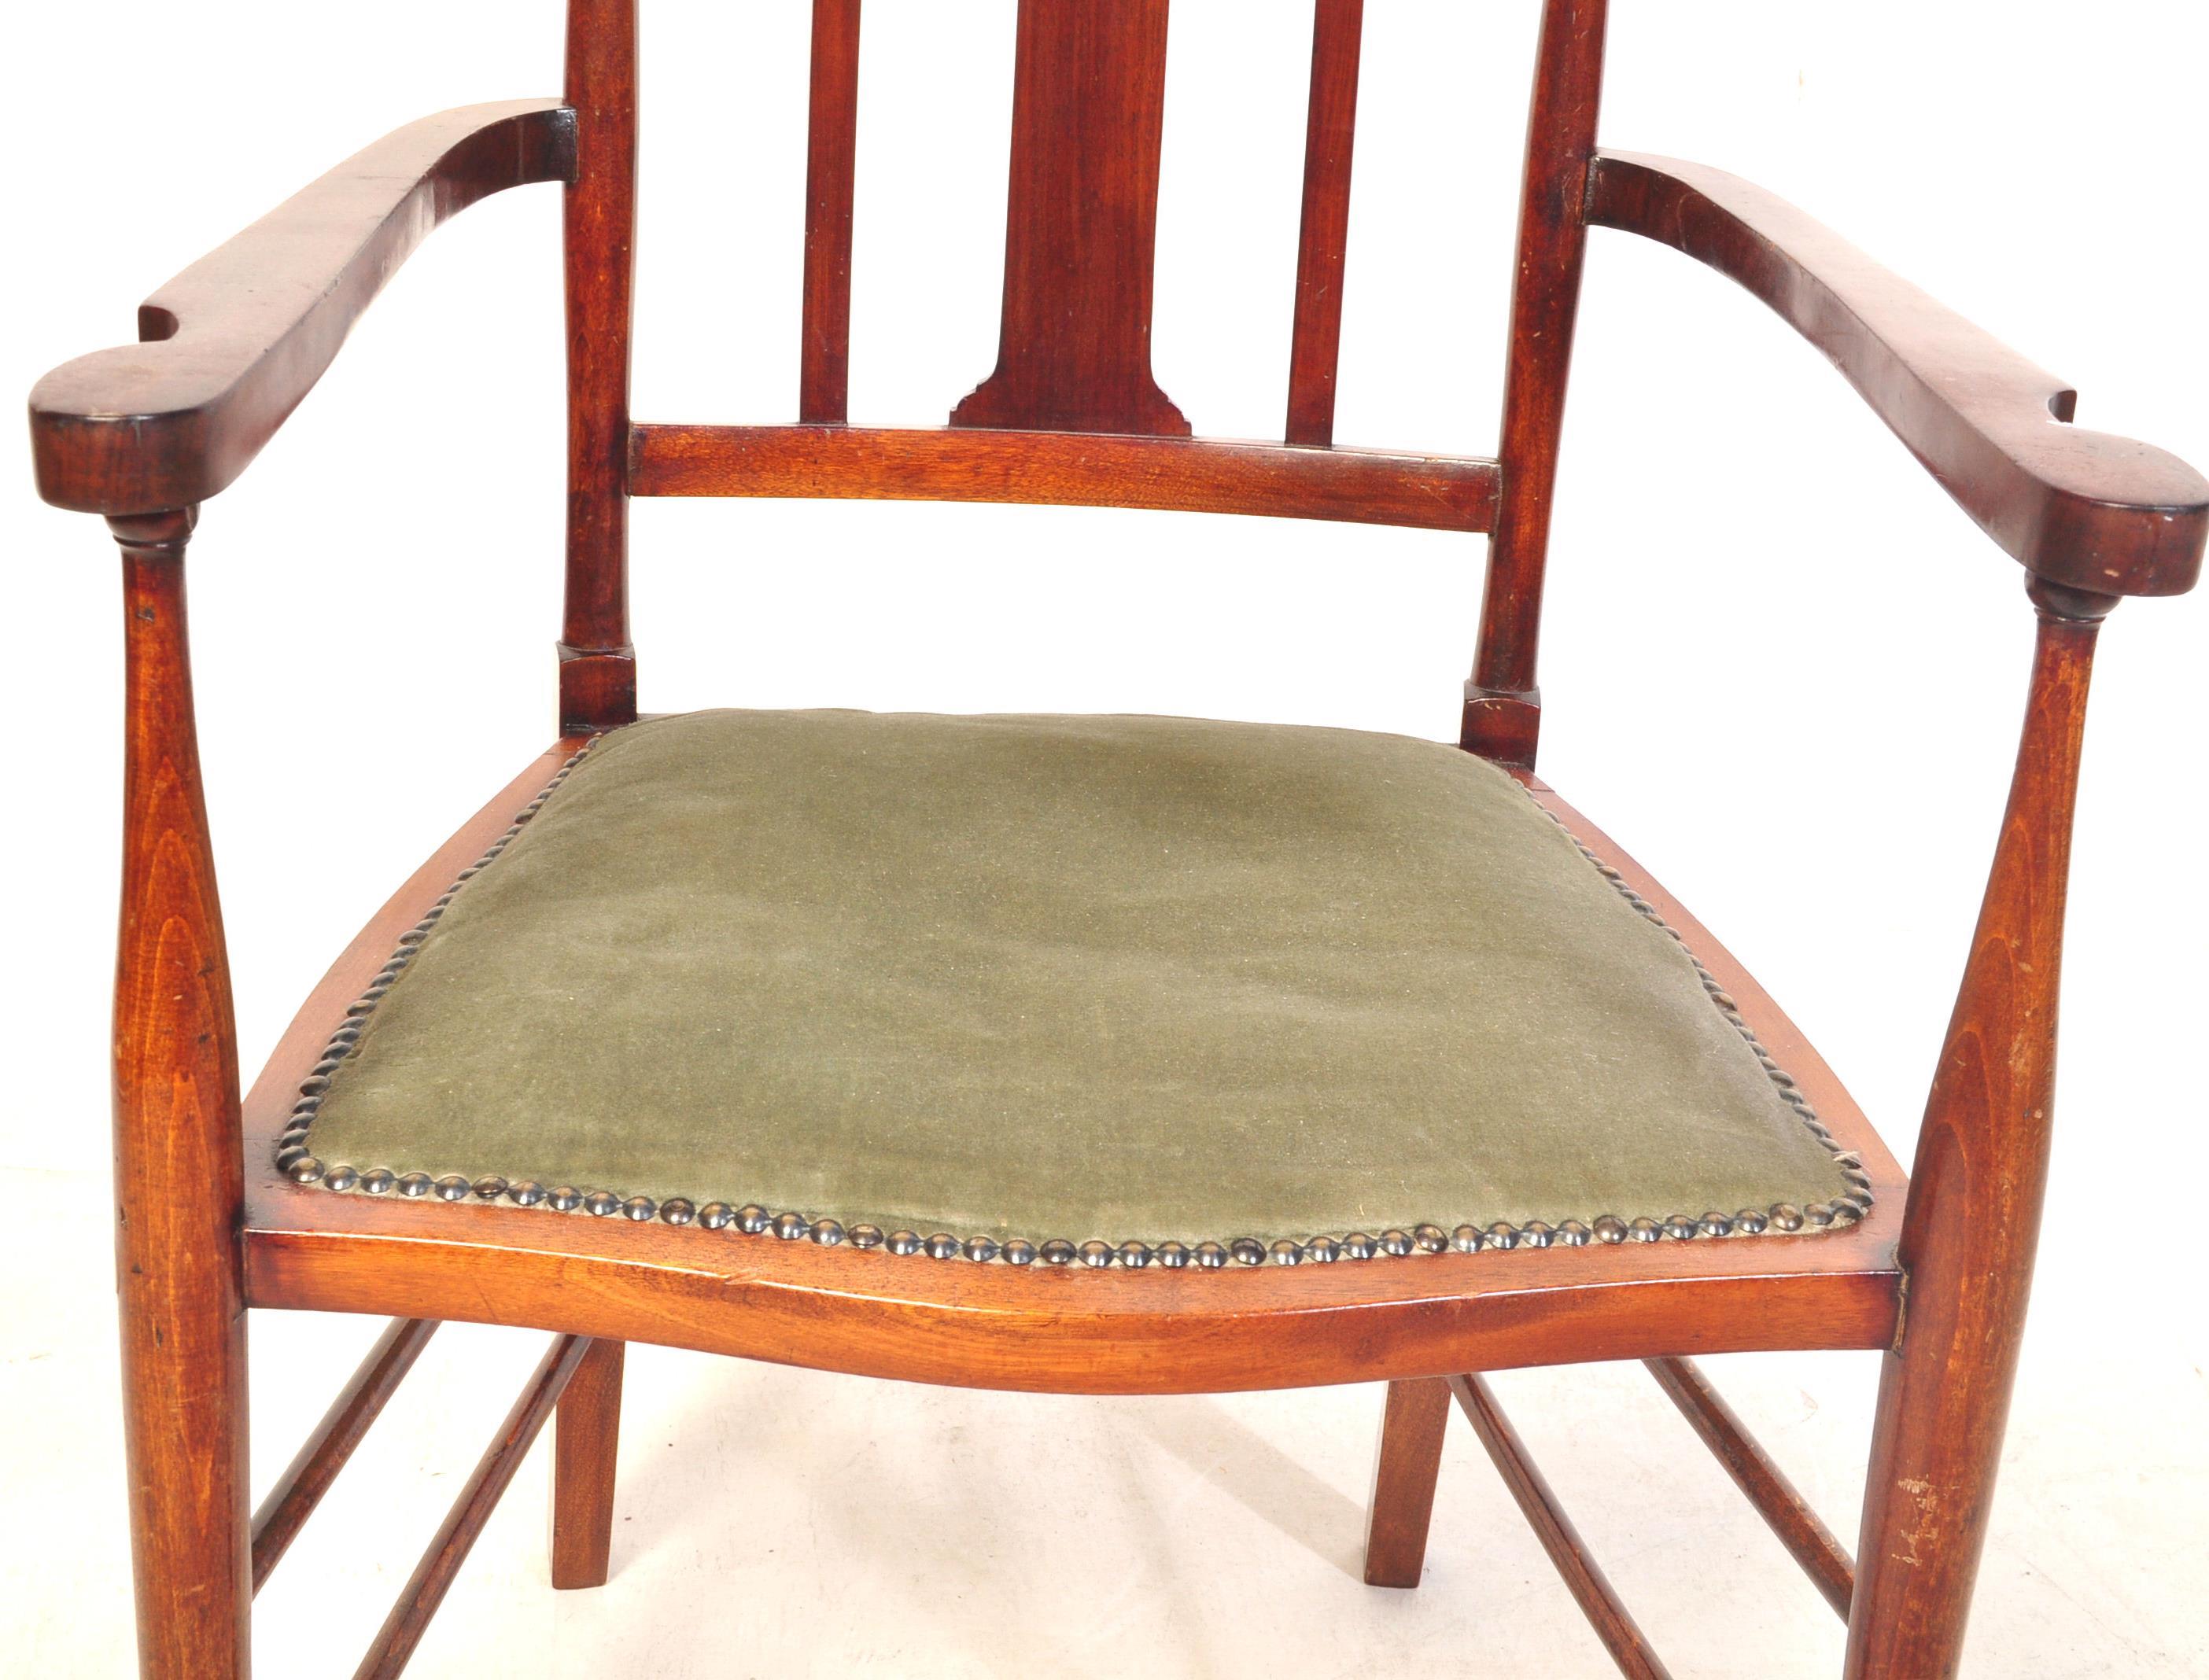 EDWARDIAN BEECH AND ELM CHAIR - Image 4 of 7